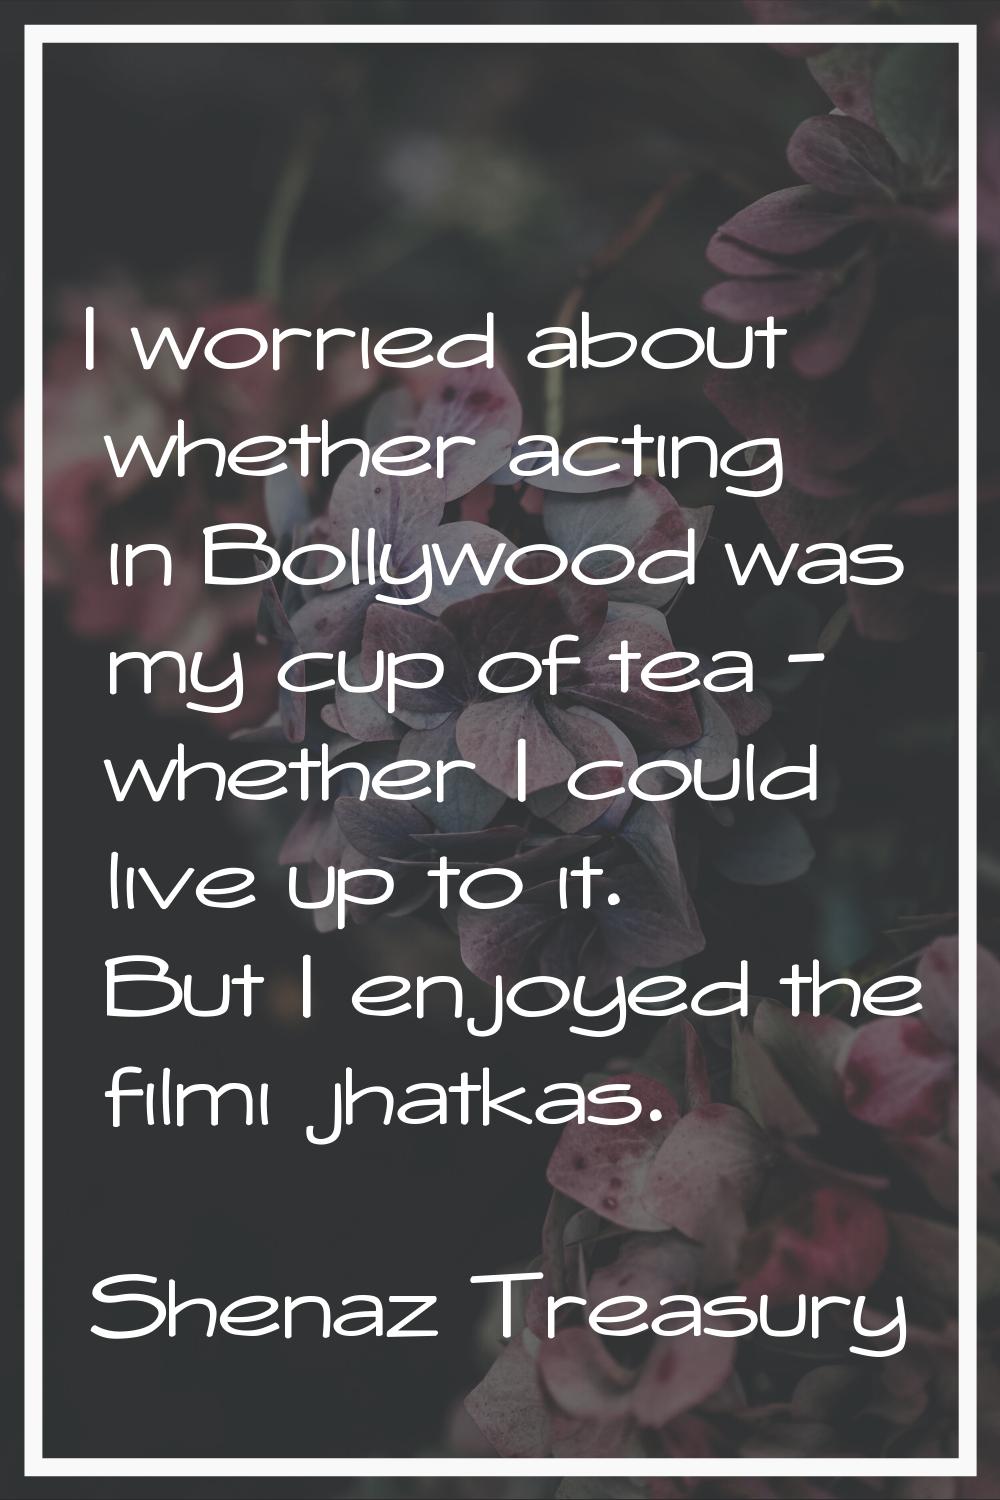 I worried about whether acting in Bollywood was my cup of tea - whether I could live up to it. But 